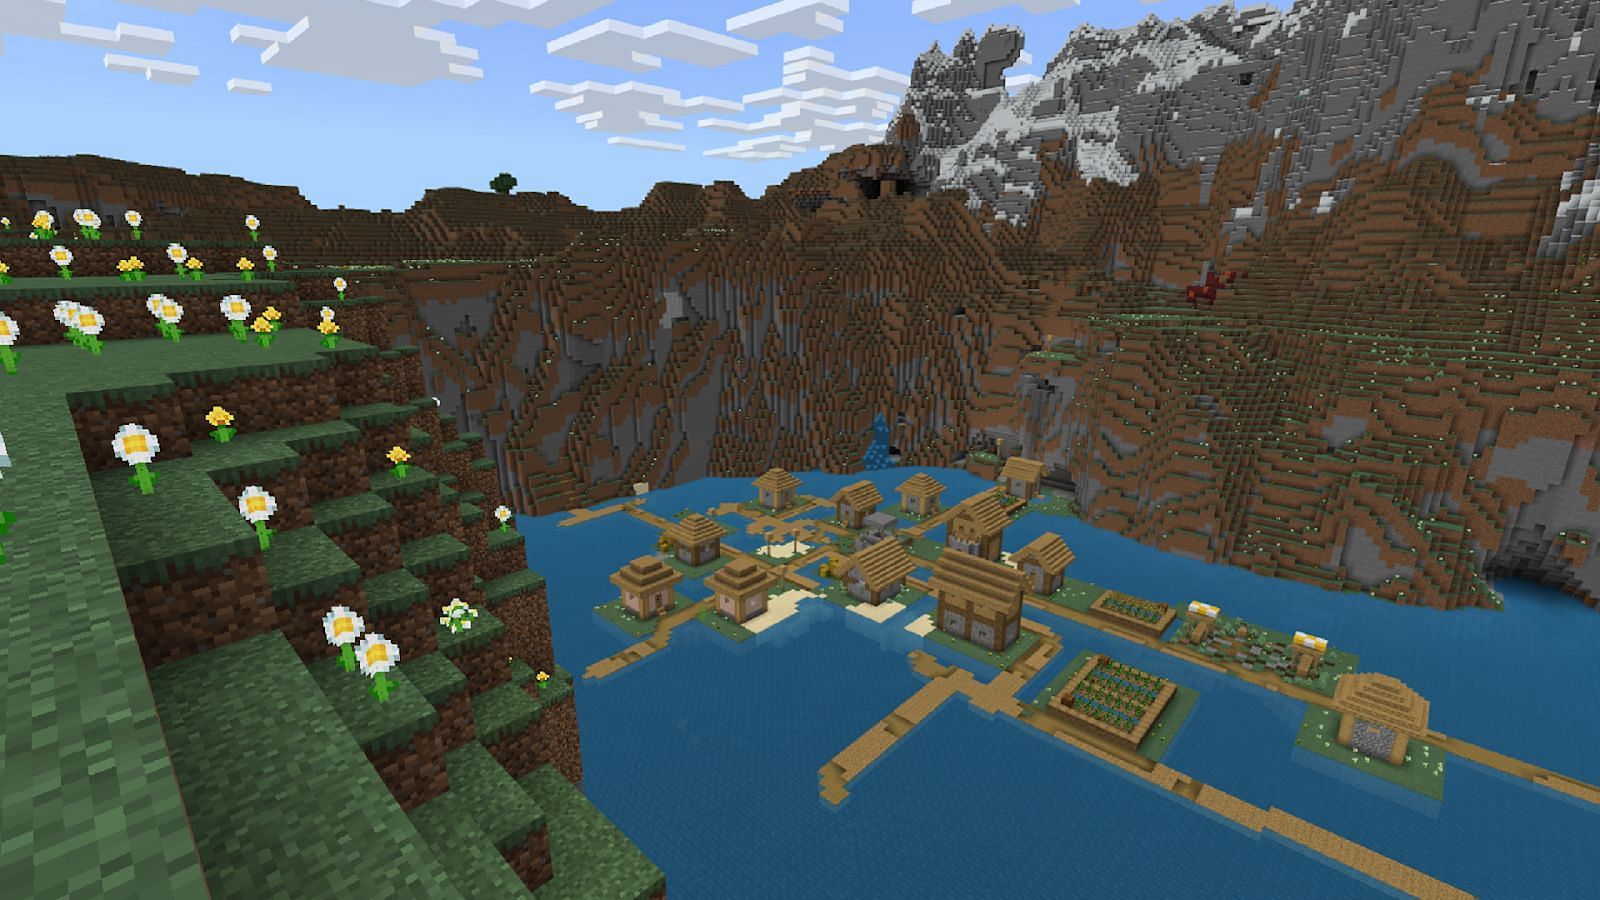 This Minecraft seed drops players right next to a particularly tranquil village (Image via Mojang)